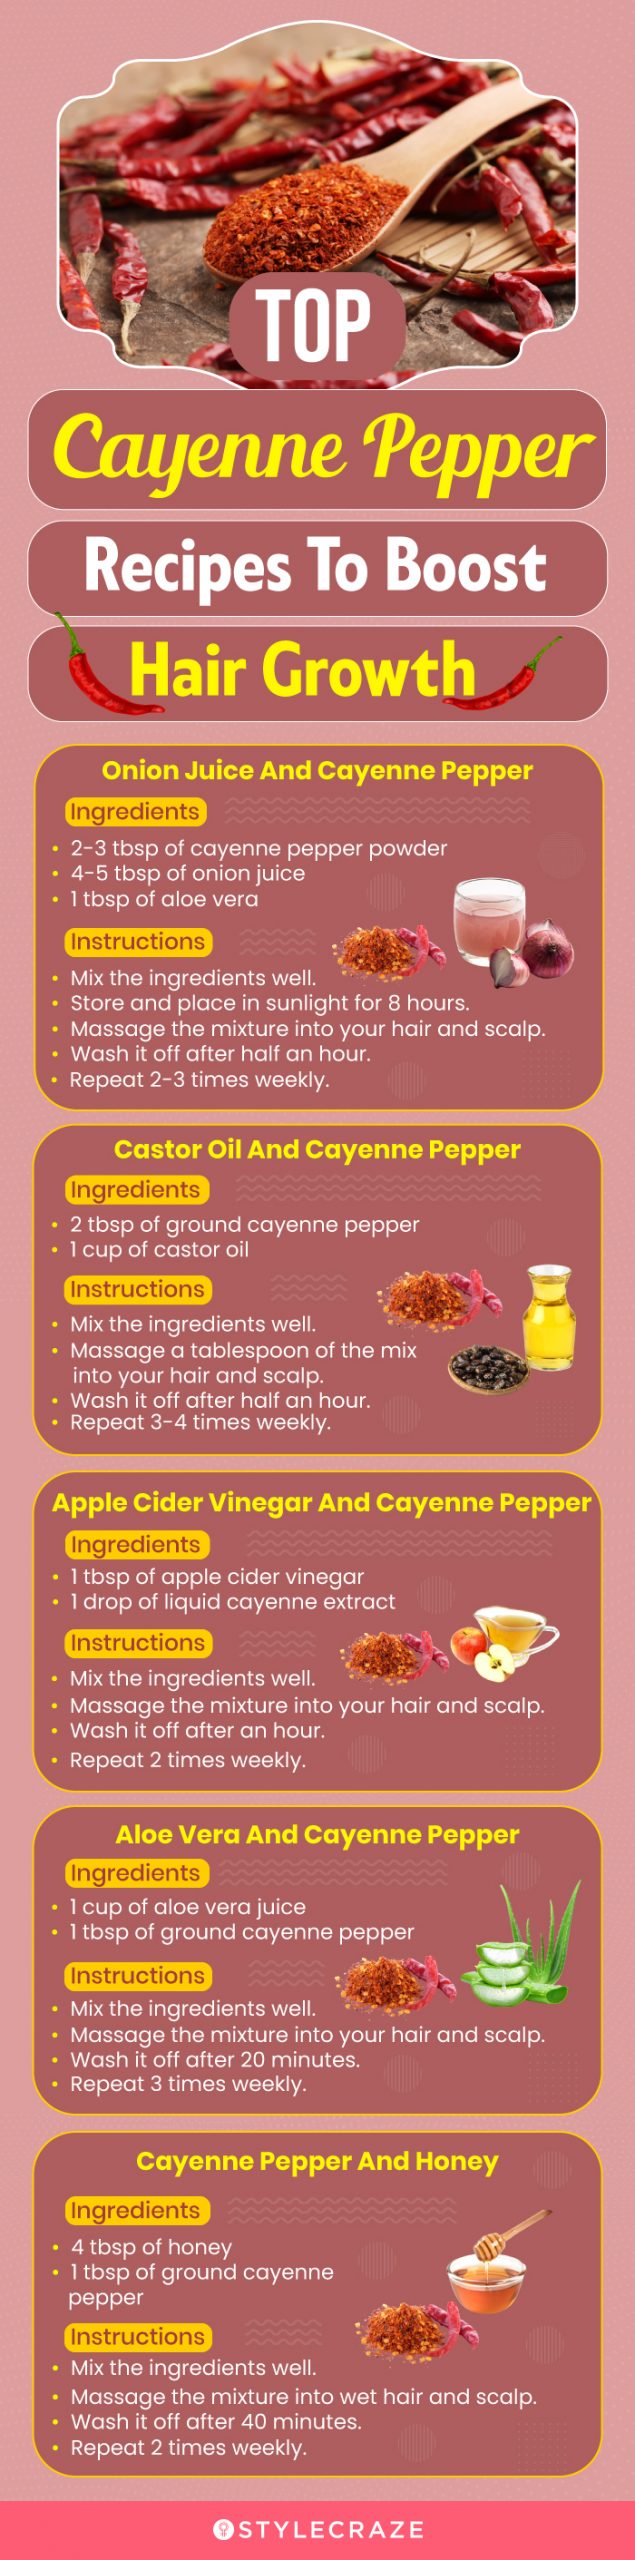 top cayenne pepper recipes to boost hair growth (infographic)